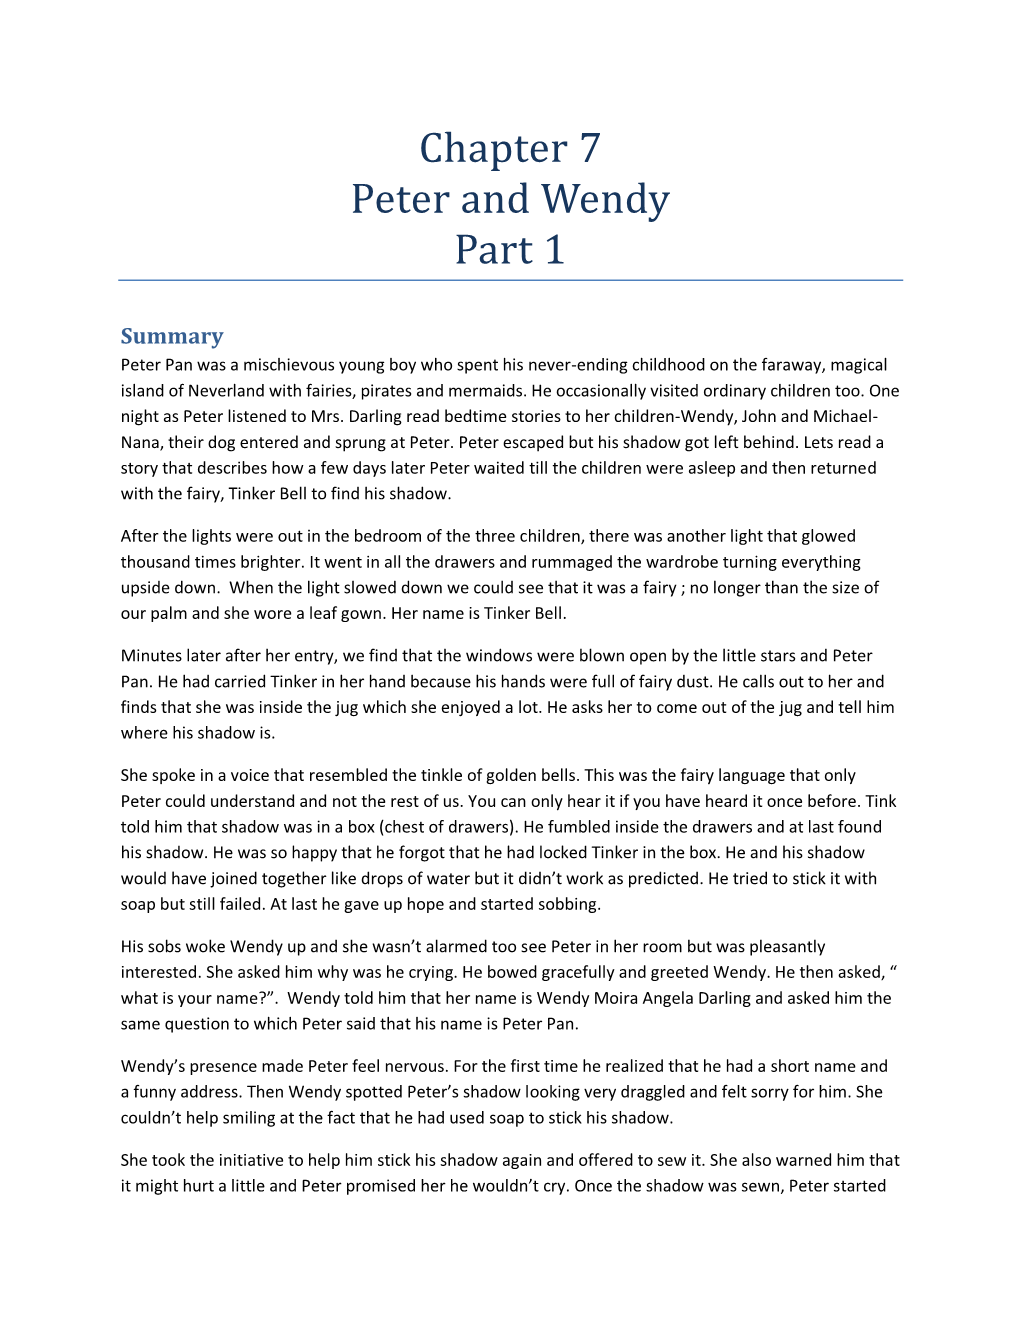 Chapter 7 Peter and Wendy Part 1